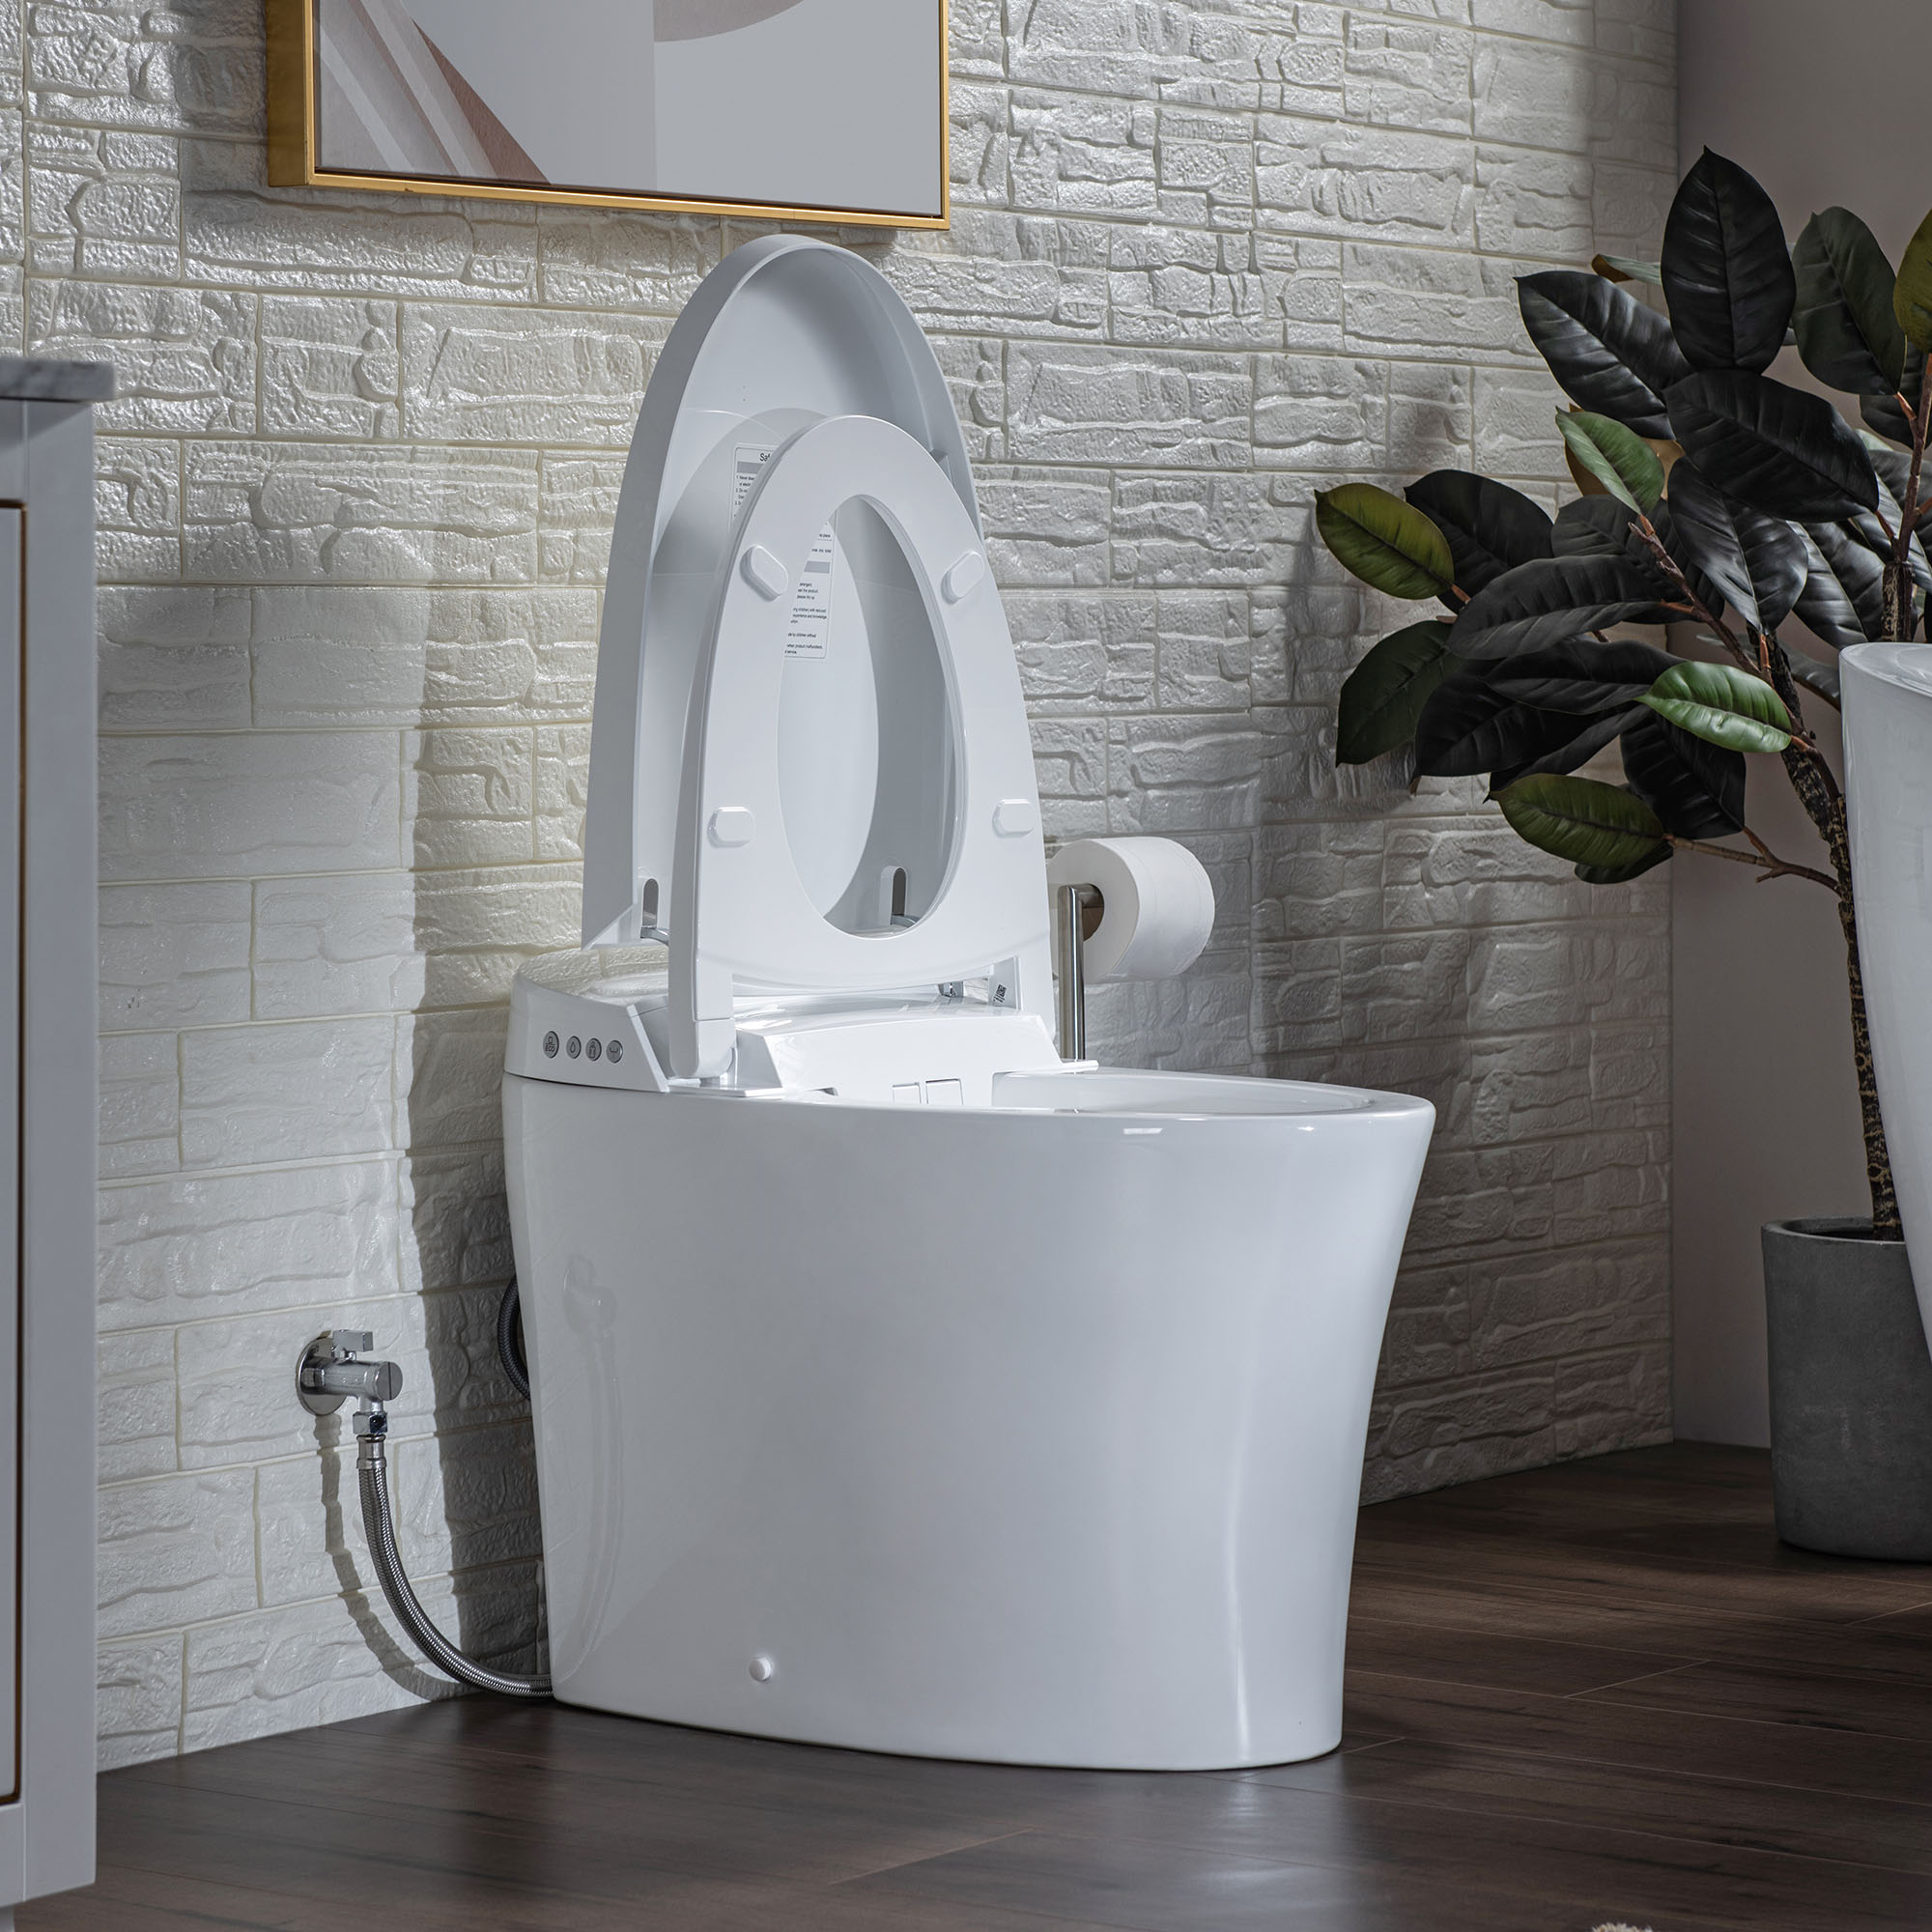  WOODBRIDGE B0970S Smart Bidet Tankless Toilet Elongated One Piece Chair Height, Auto Flush, Foot Sensor Operation, Heated Seat with Integrated Multi Function Remote Control in White_12173